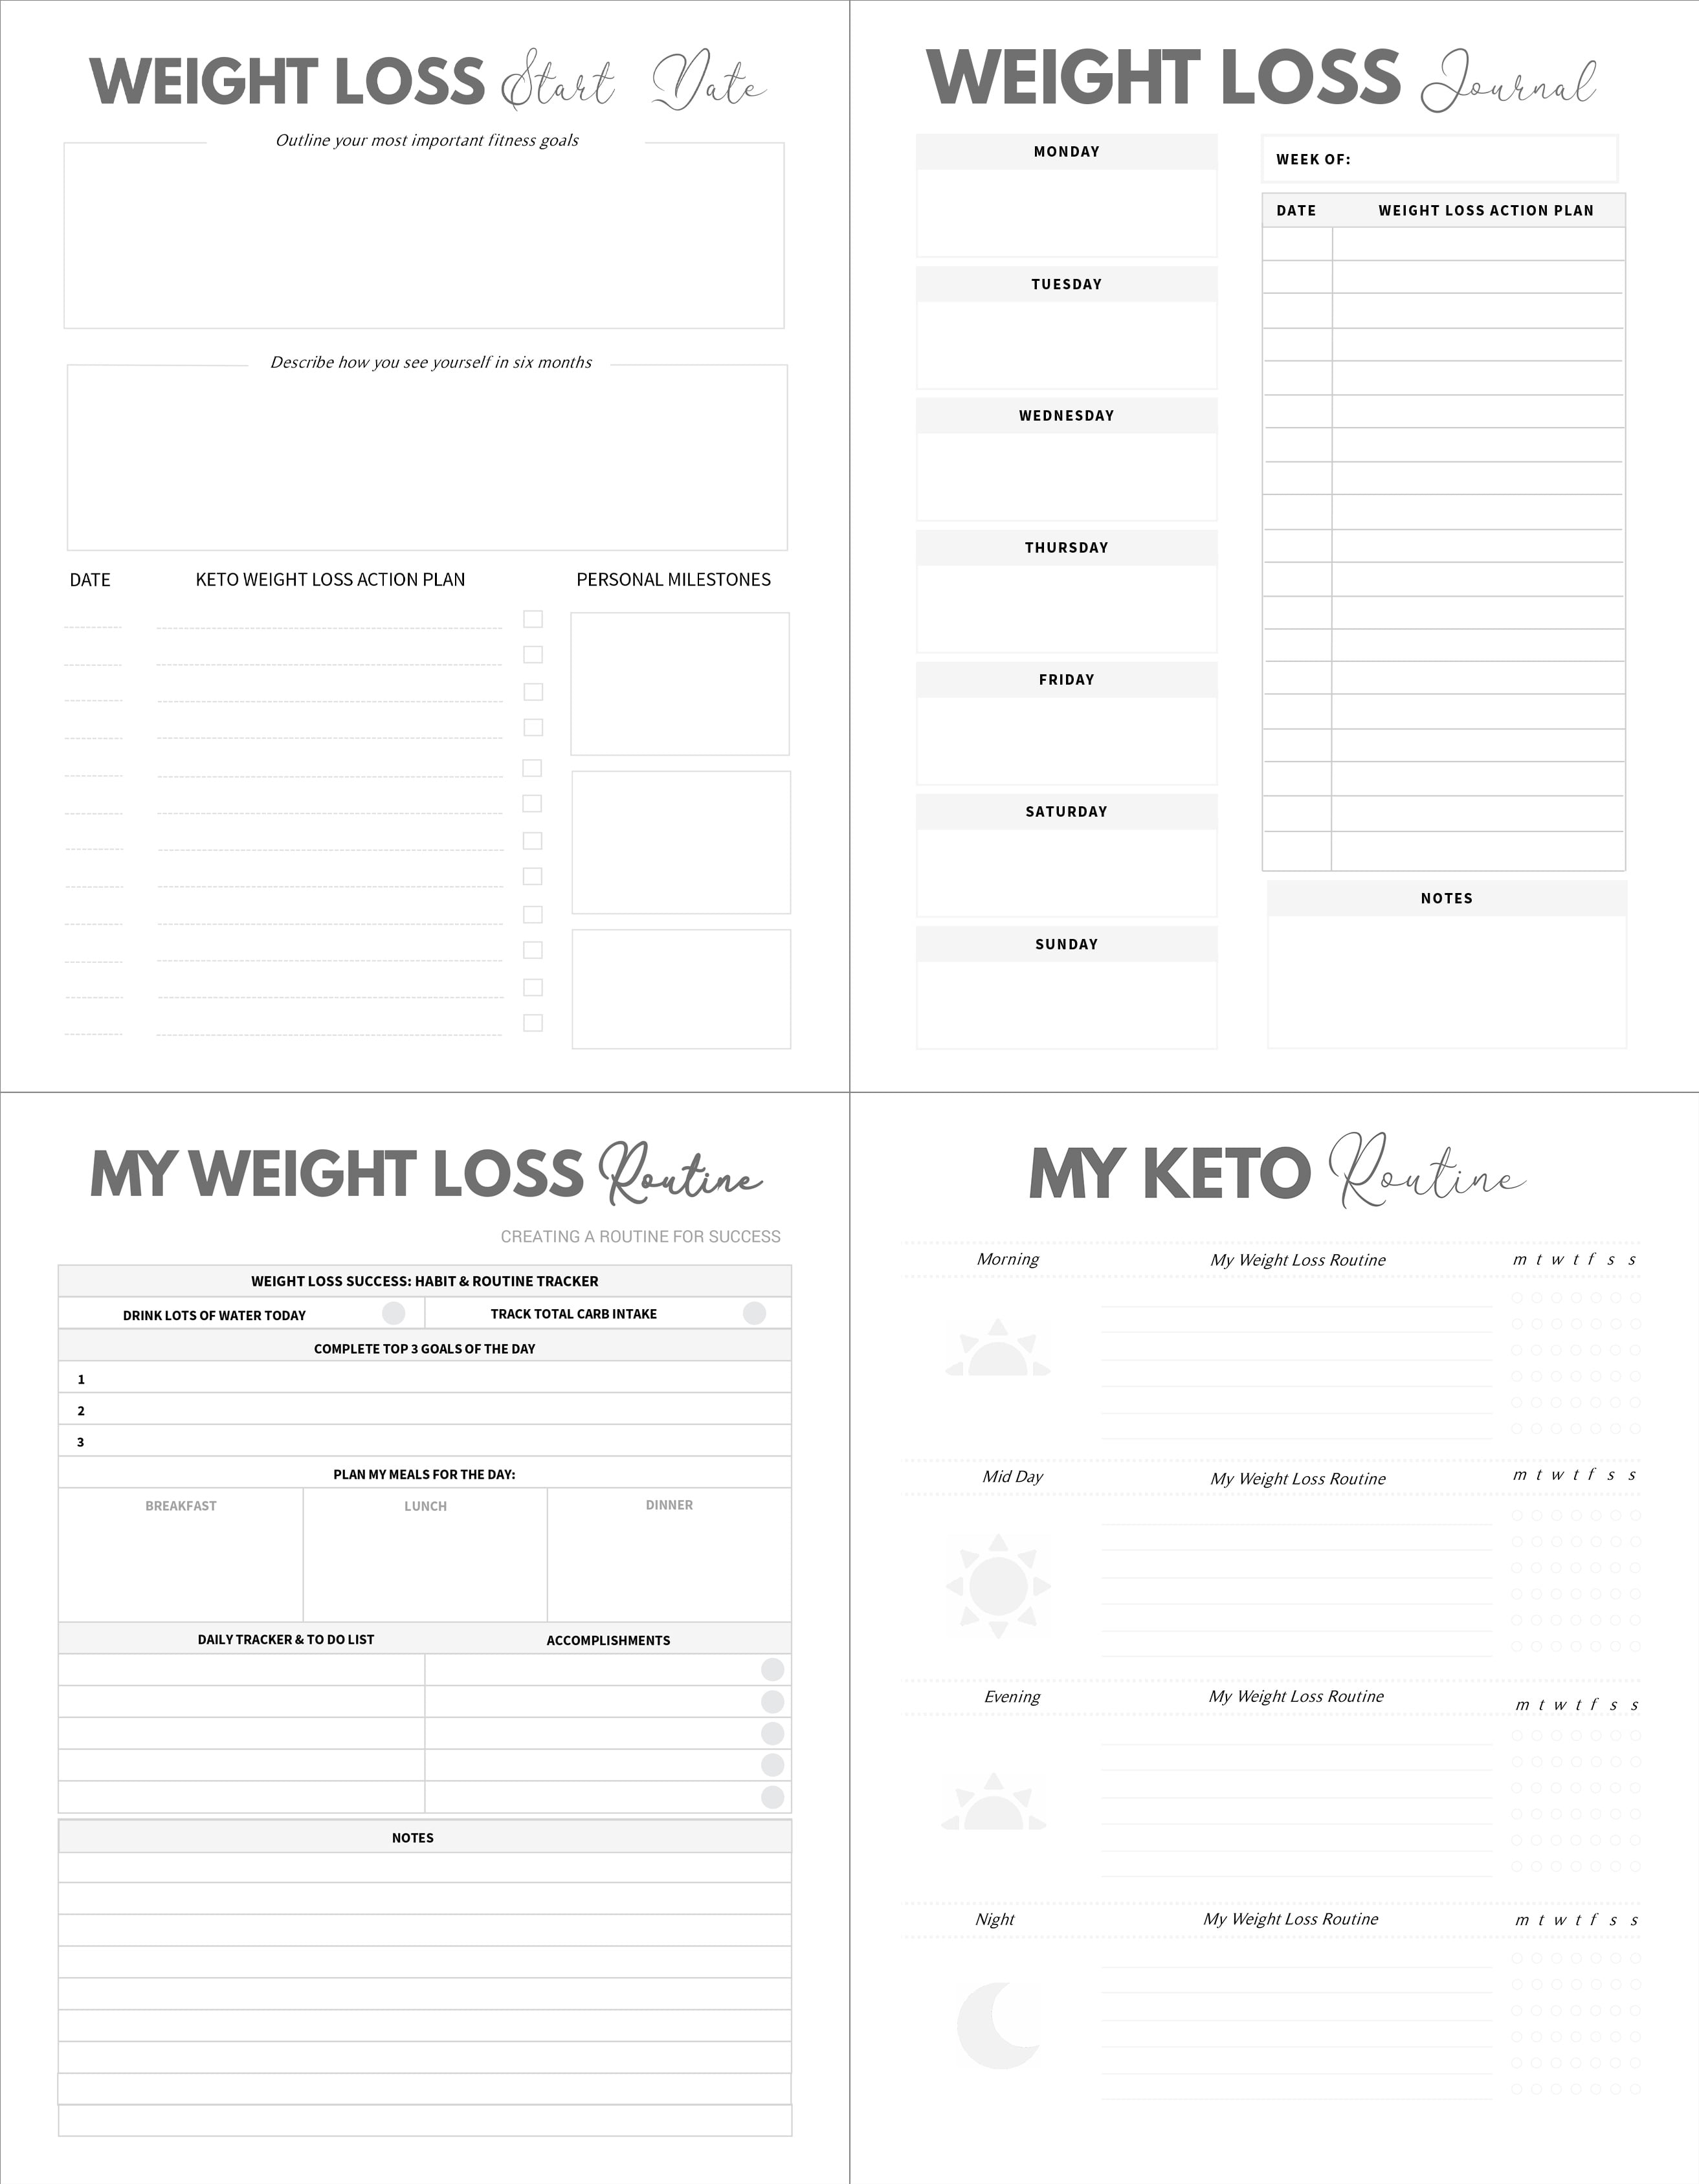 Picture of Page, Text with text WEIGHT LOSS Start Date WEIGHT LOSS Journal Outline your most importa...